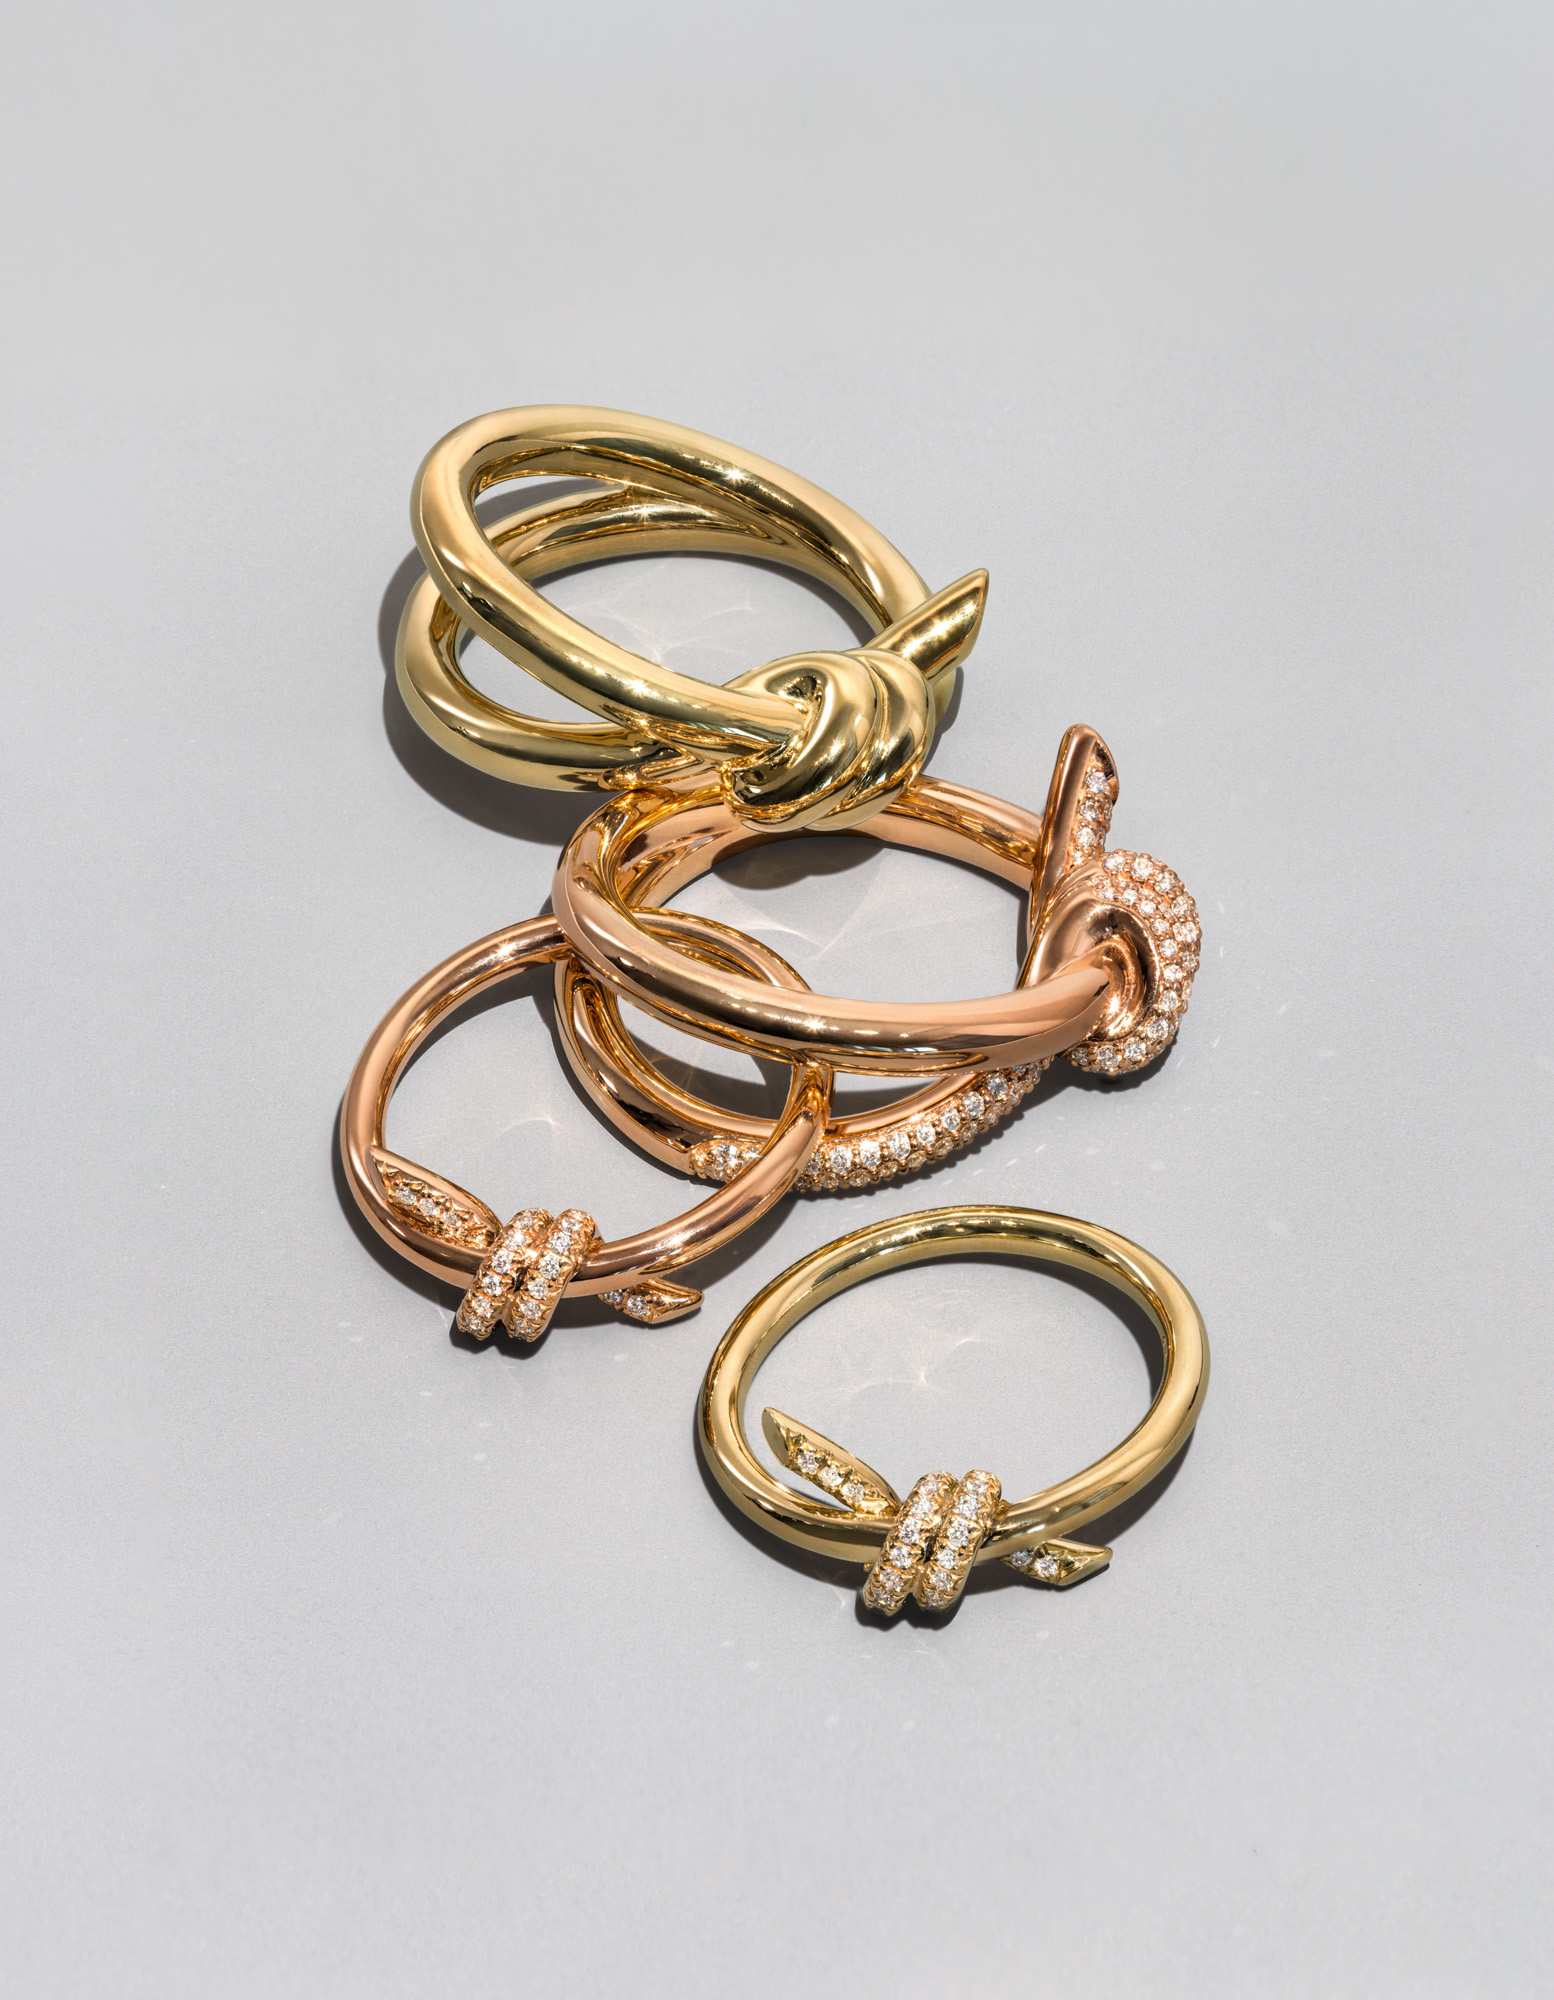 18k yellow and rose gold Tiffany Knot rings with and without pavé